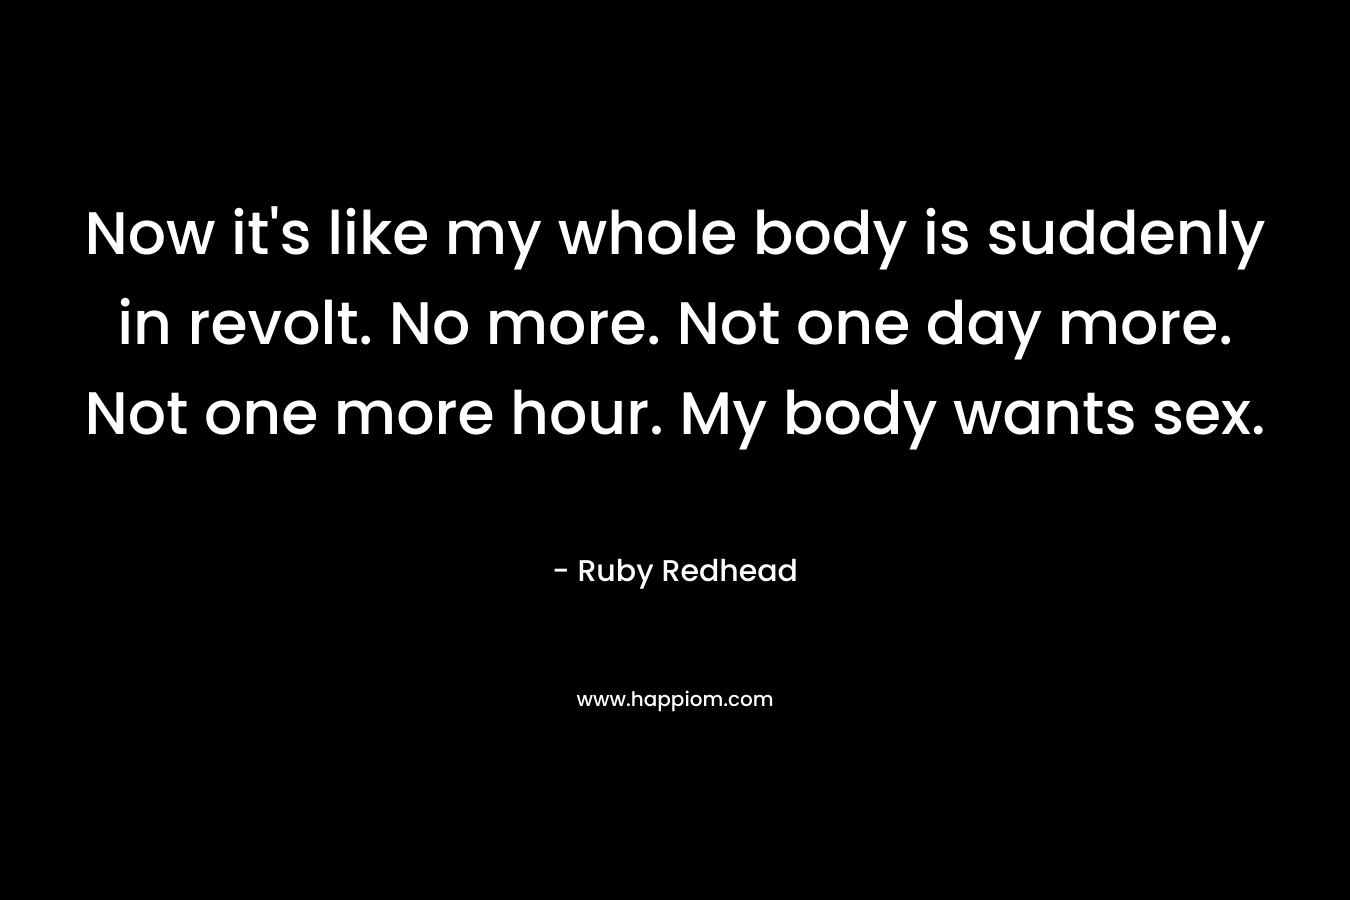 Now it’s like my whole body is suddenly in revolt. No more. Not one day more. Not one more hour. My body wants sex. – Ruby Redhead